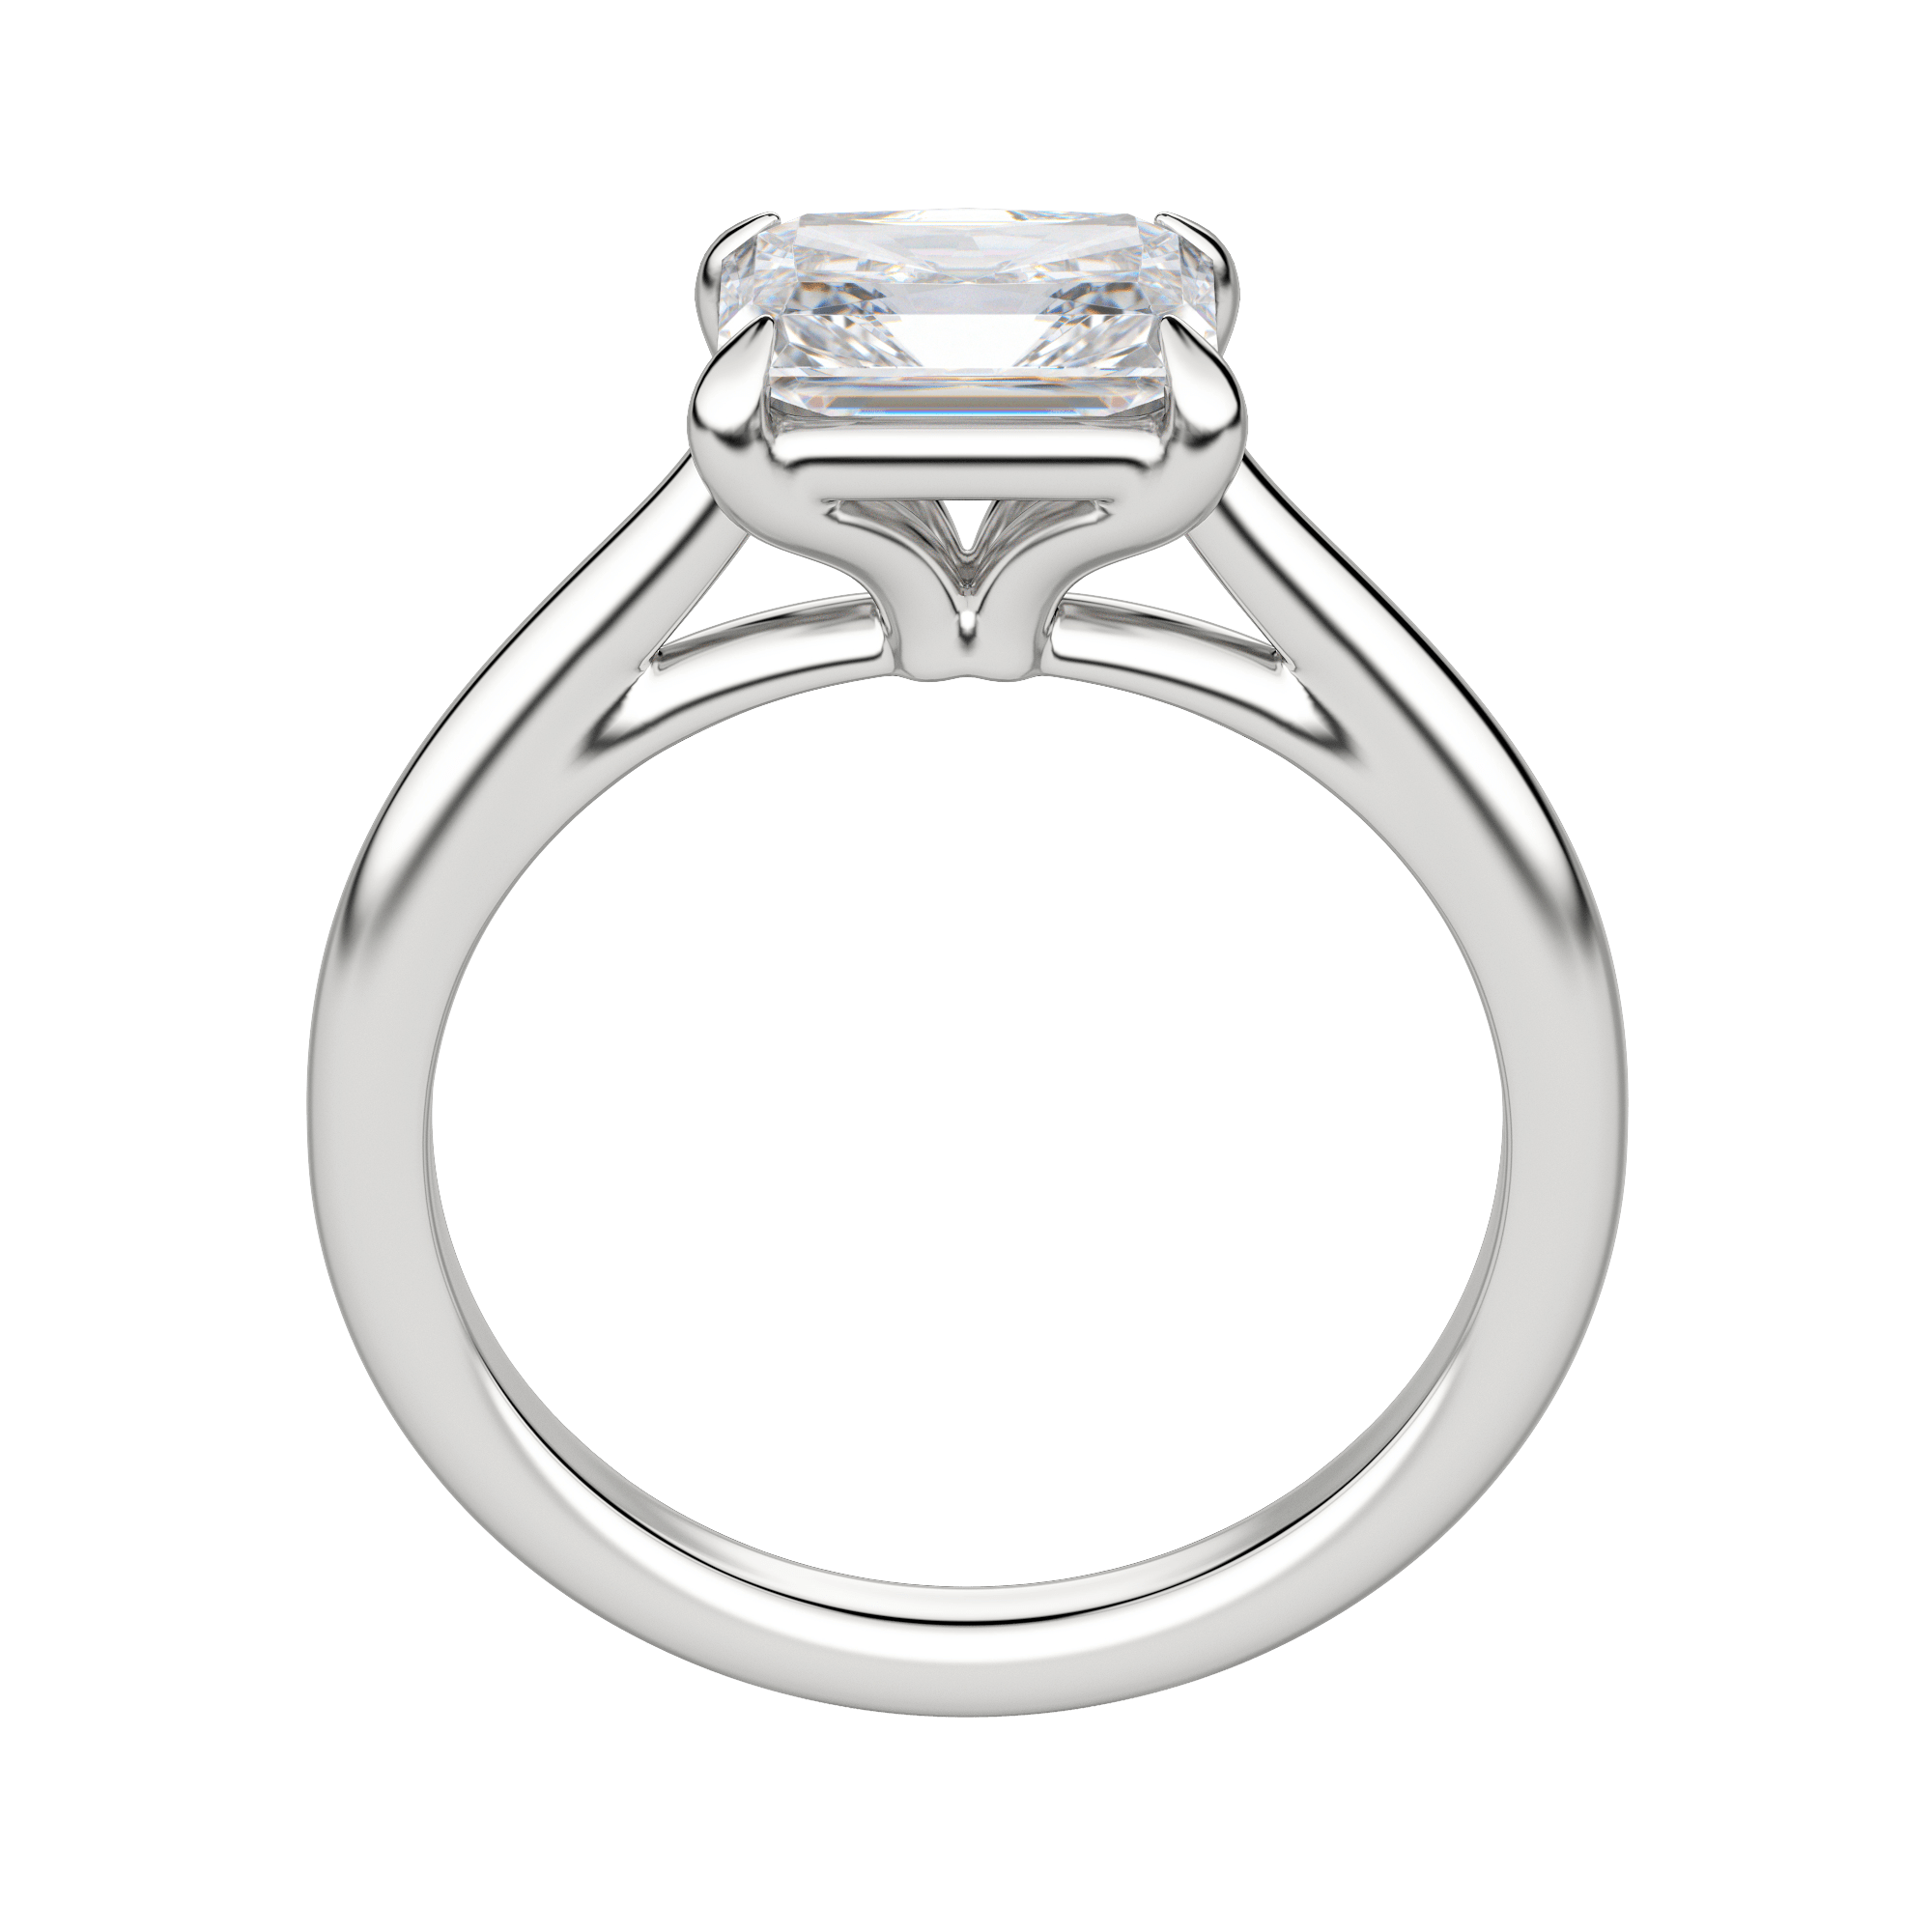 Edgy Classic Emerald Cut Engagement Ring, Platinum, 18K White Gold, Hover, 